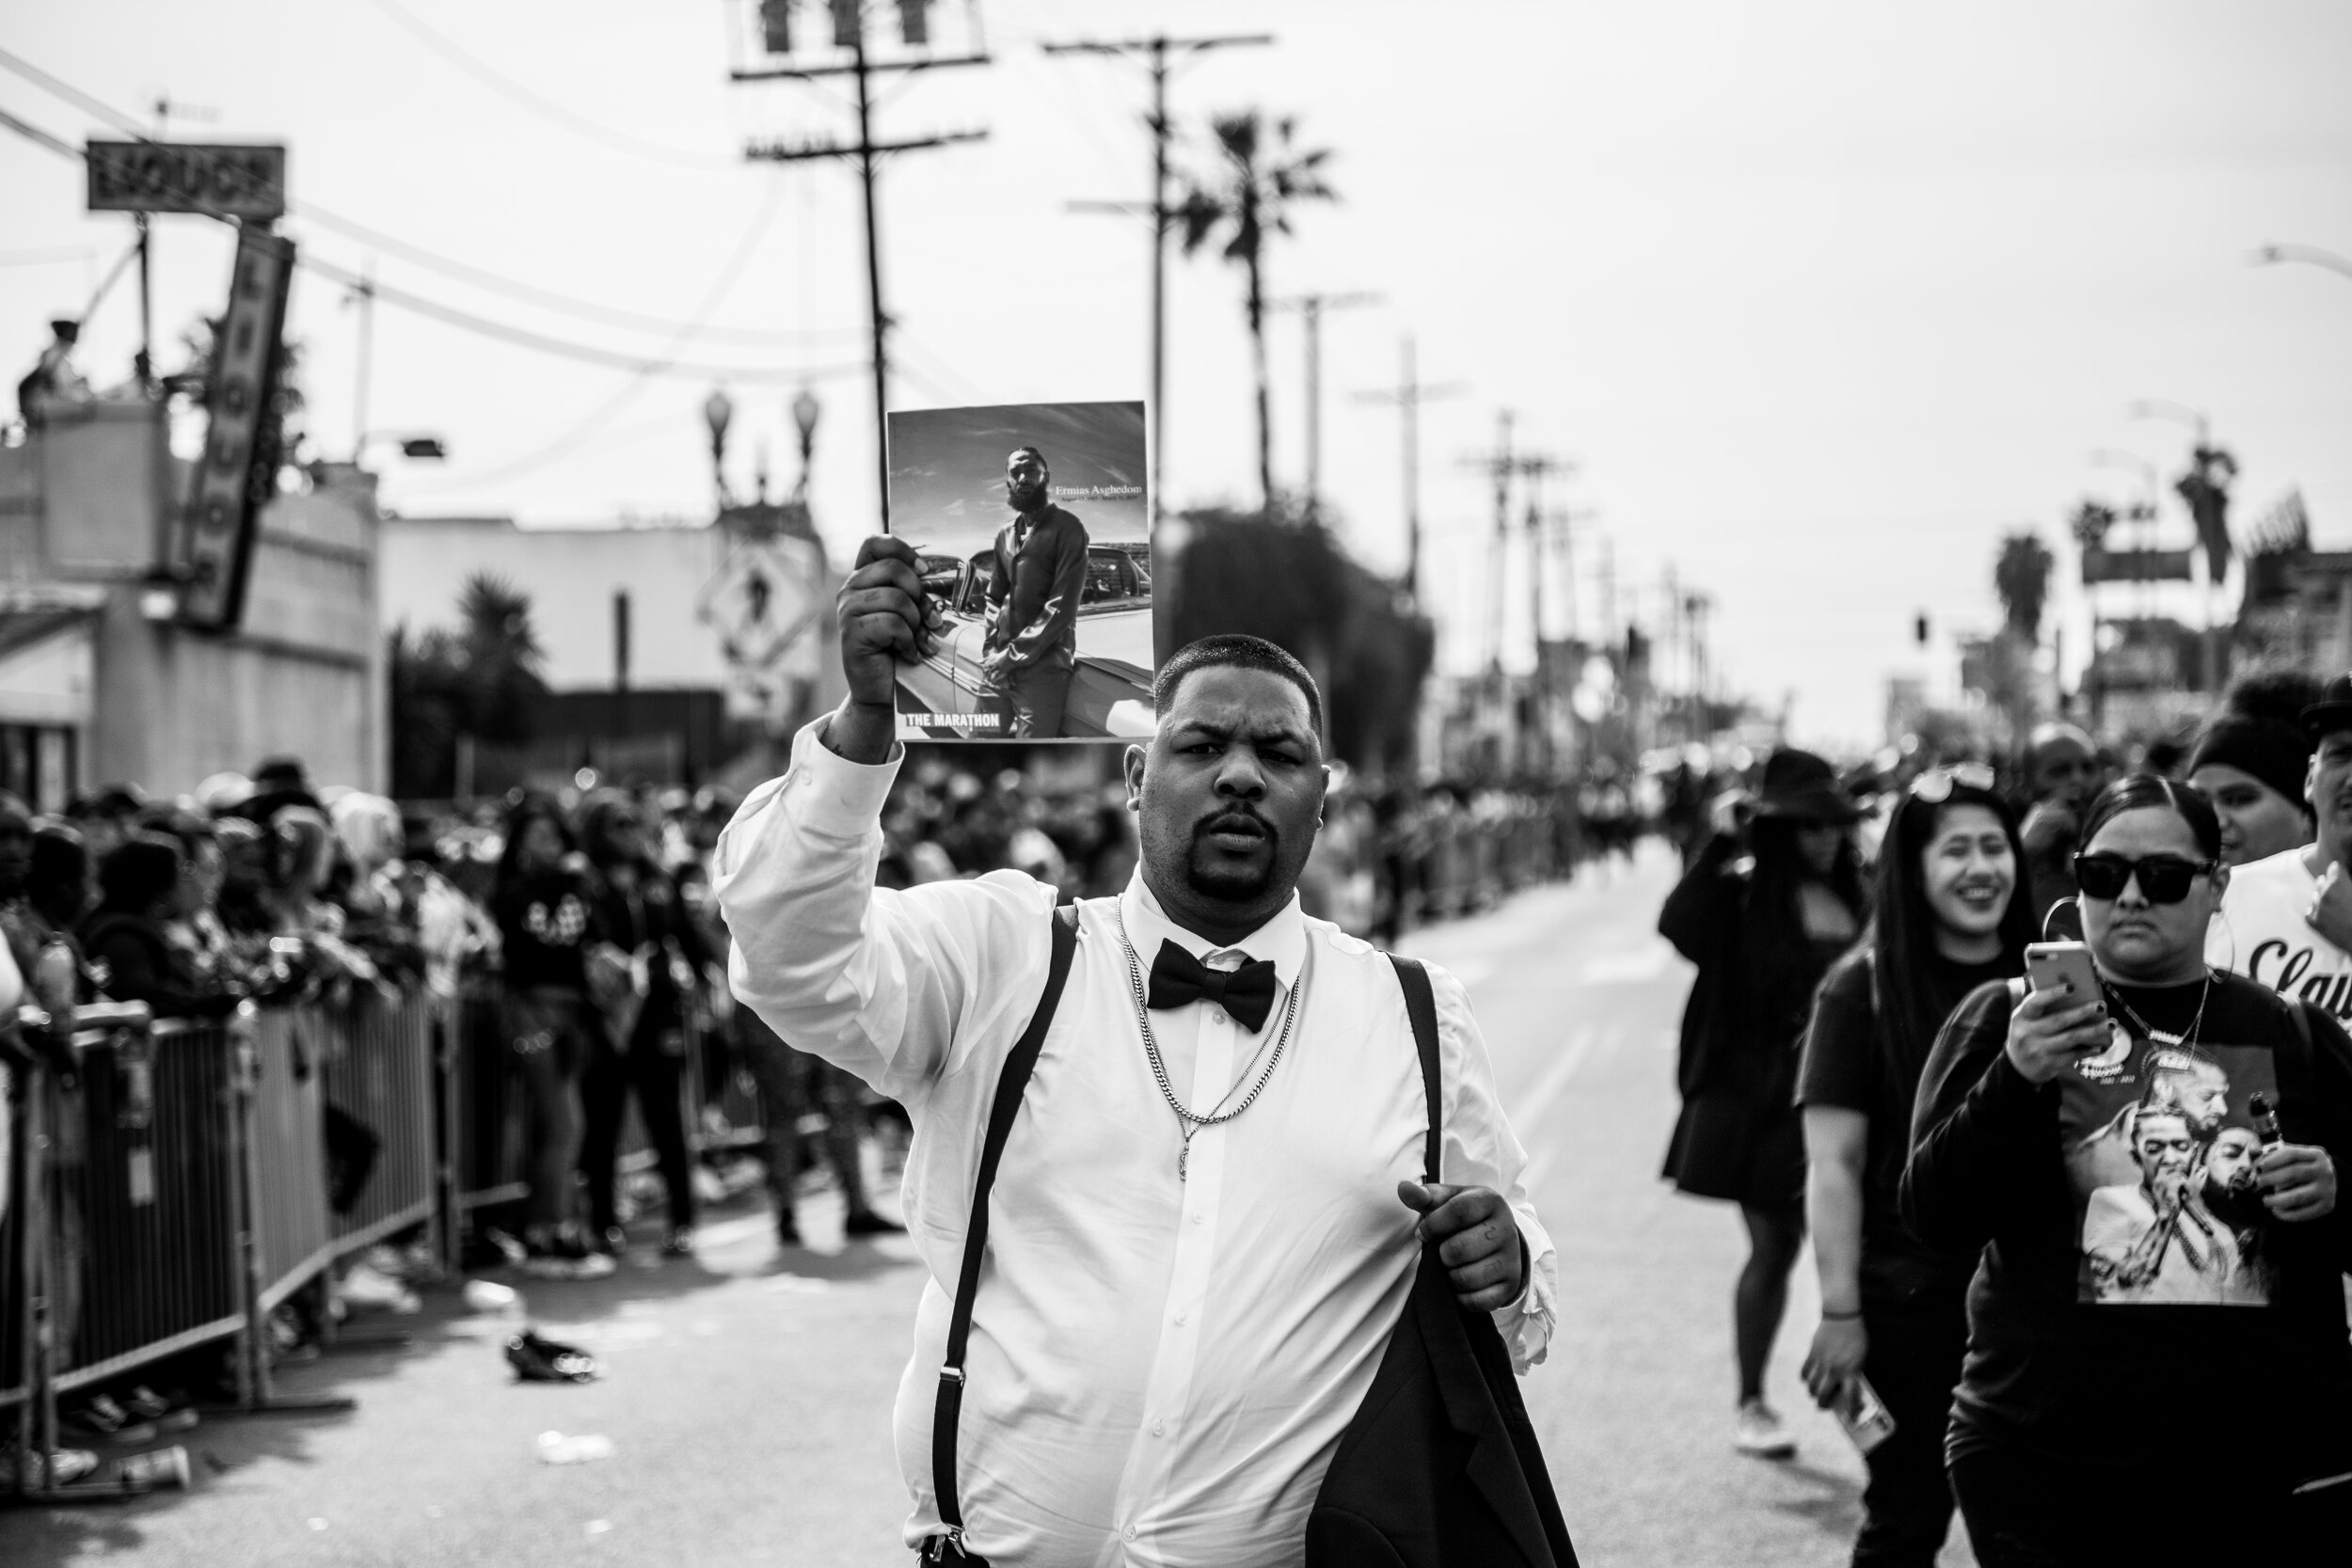  Photos from the Nipsey Hussle funeral procession on April 11, 2019.  